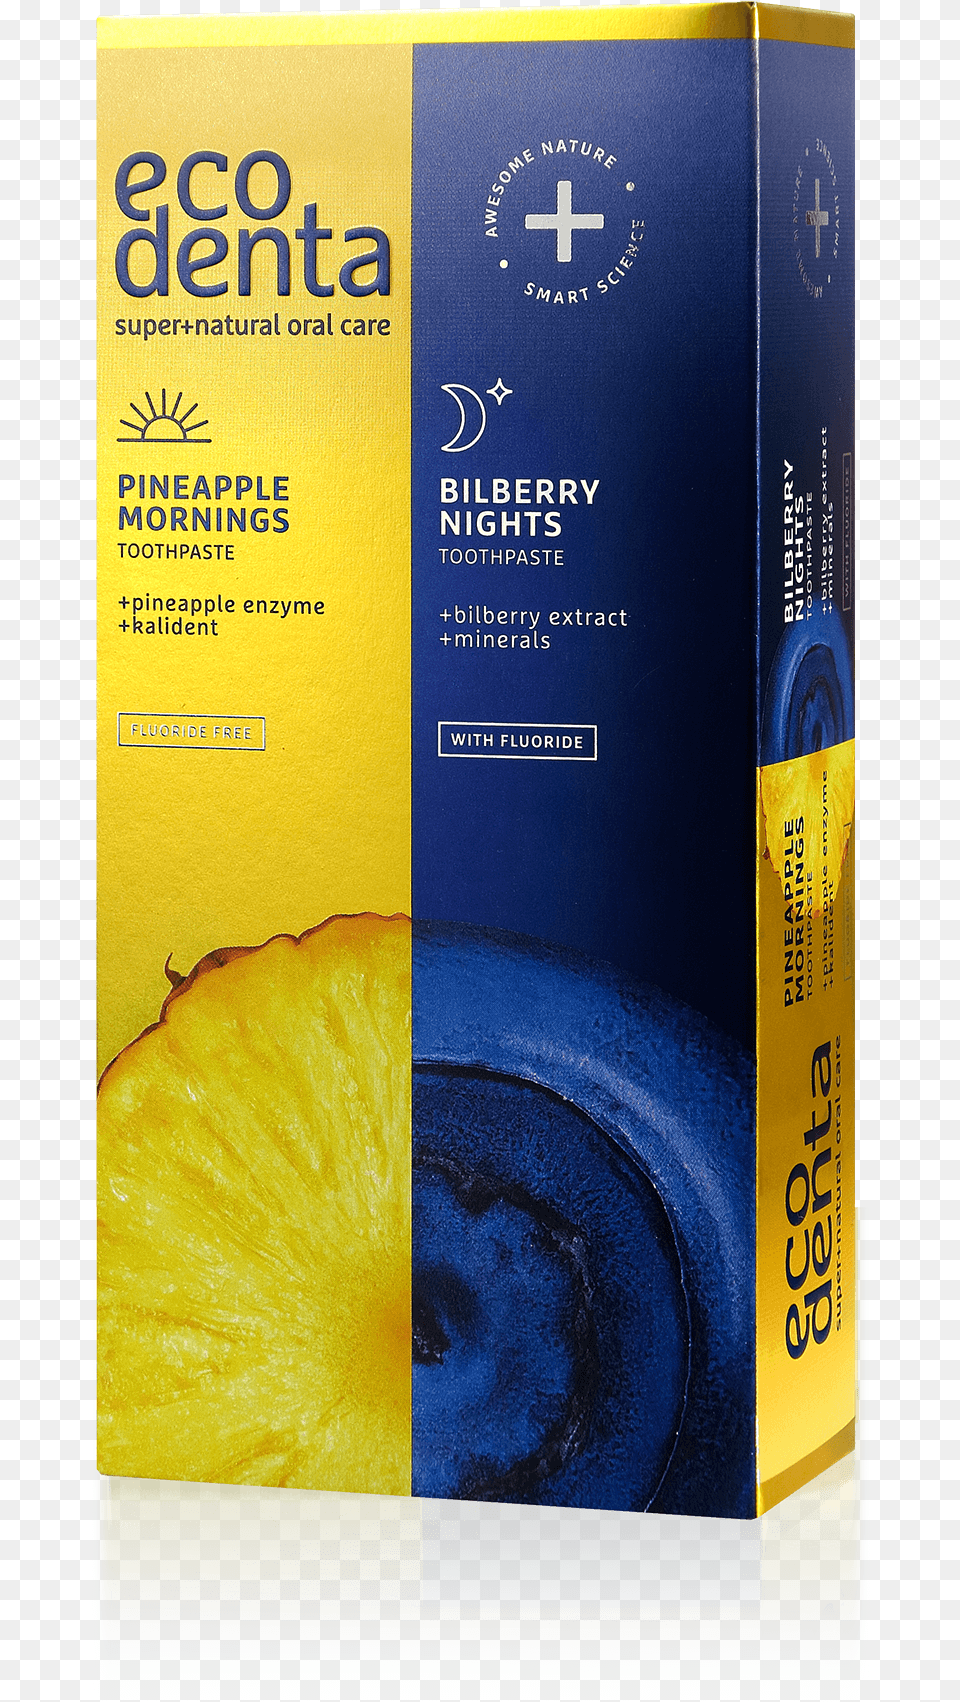 Ecodenta Pineapple Mornings And Bilberry Nights Toothpastes Toothpaste, Advertisement, Book, Publication, Poster Png